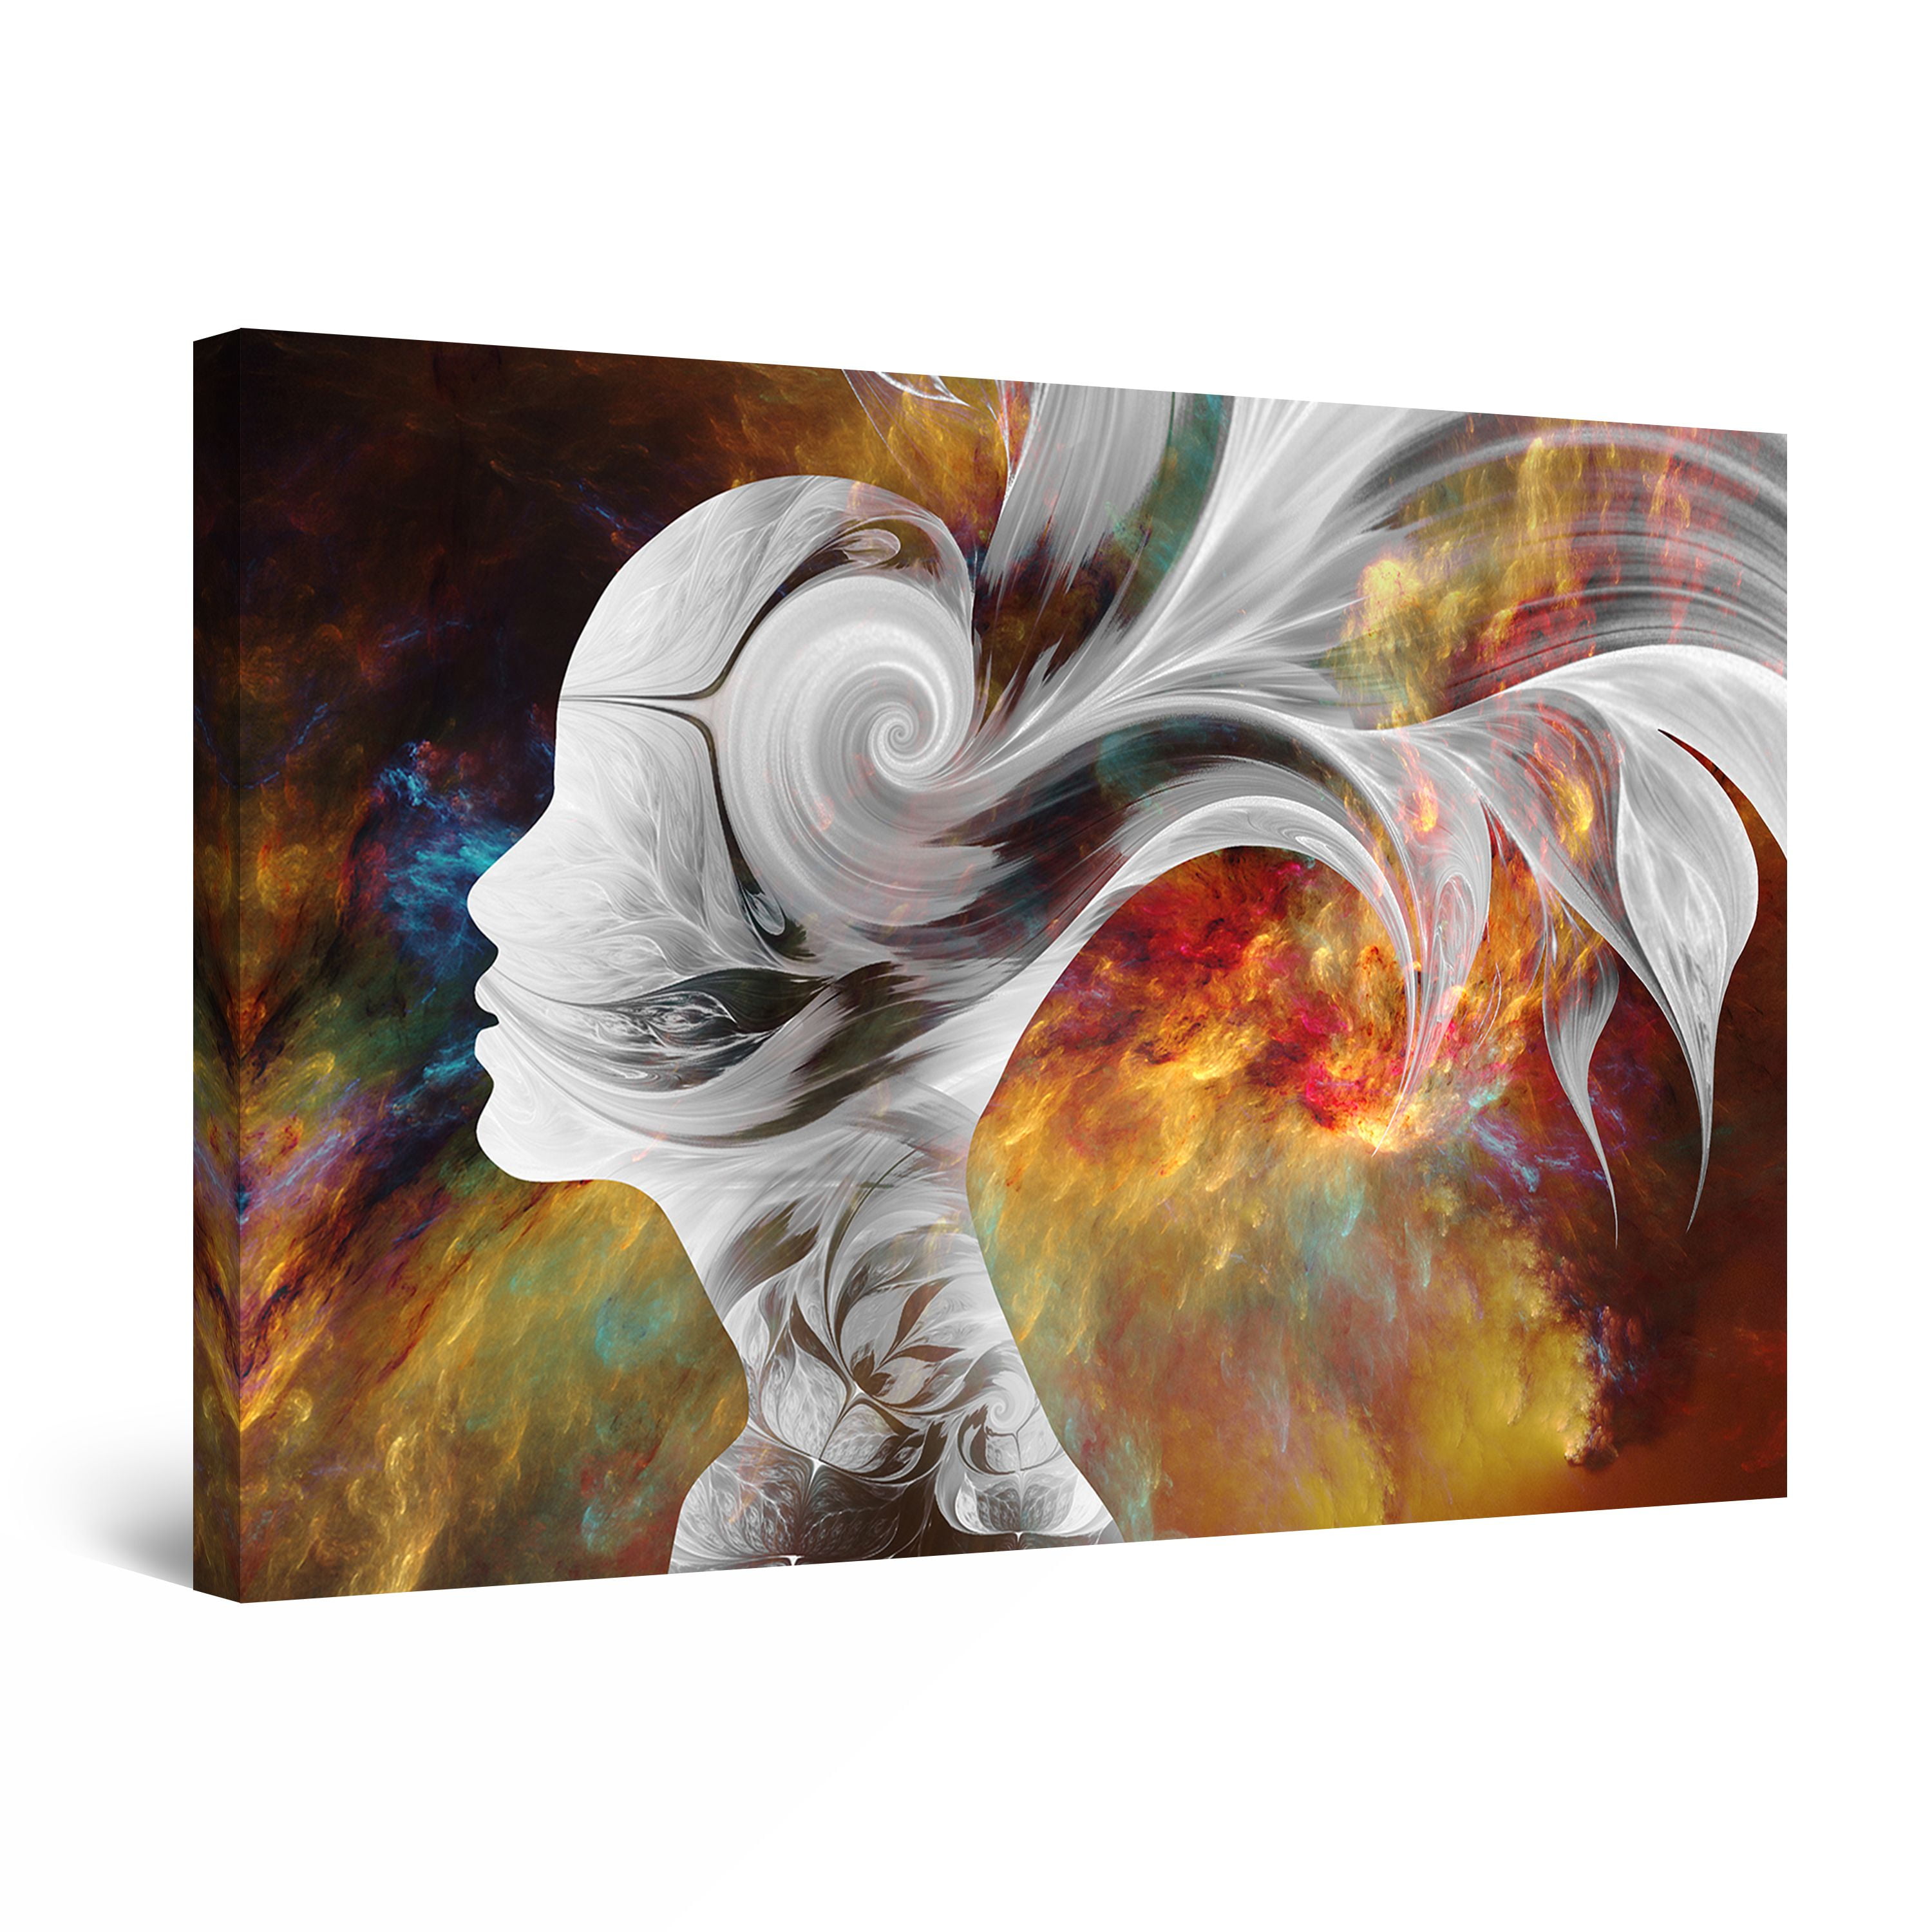 Details about   Contemporary Wall Art Abstract Painting Canvas Poster Modern Minimalist Artwork 